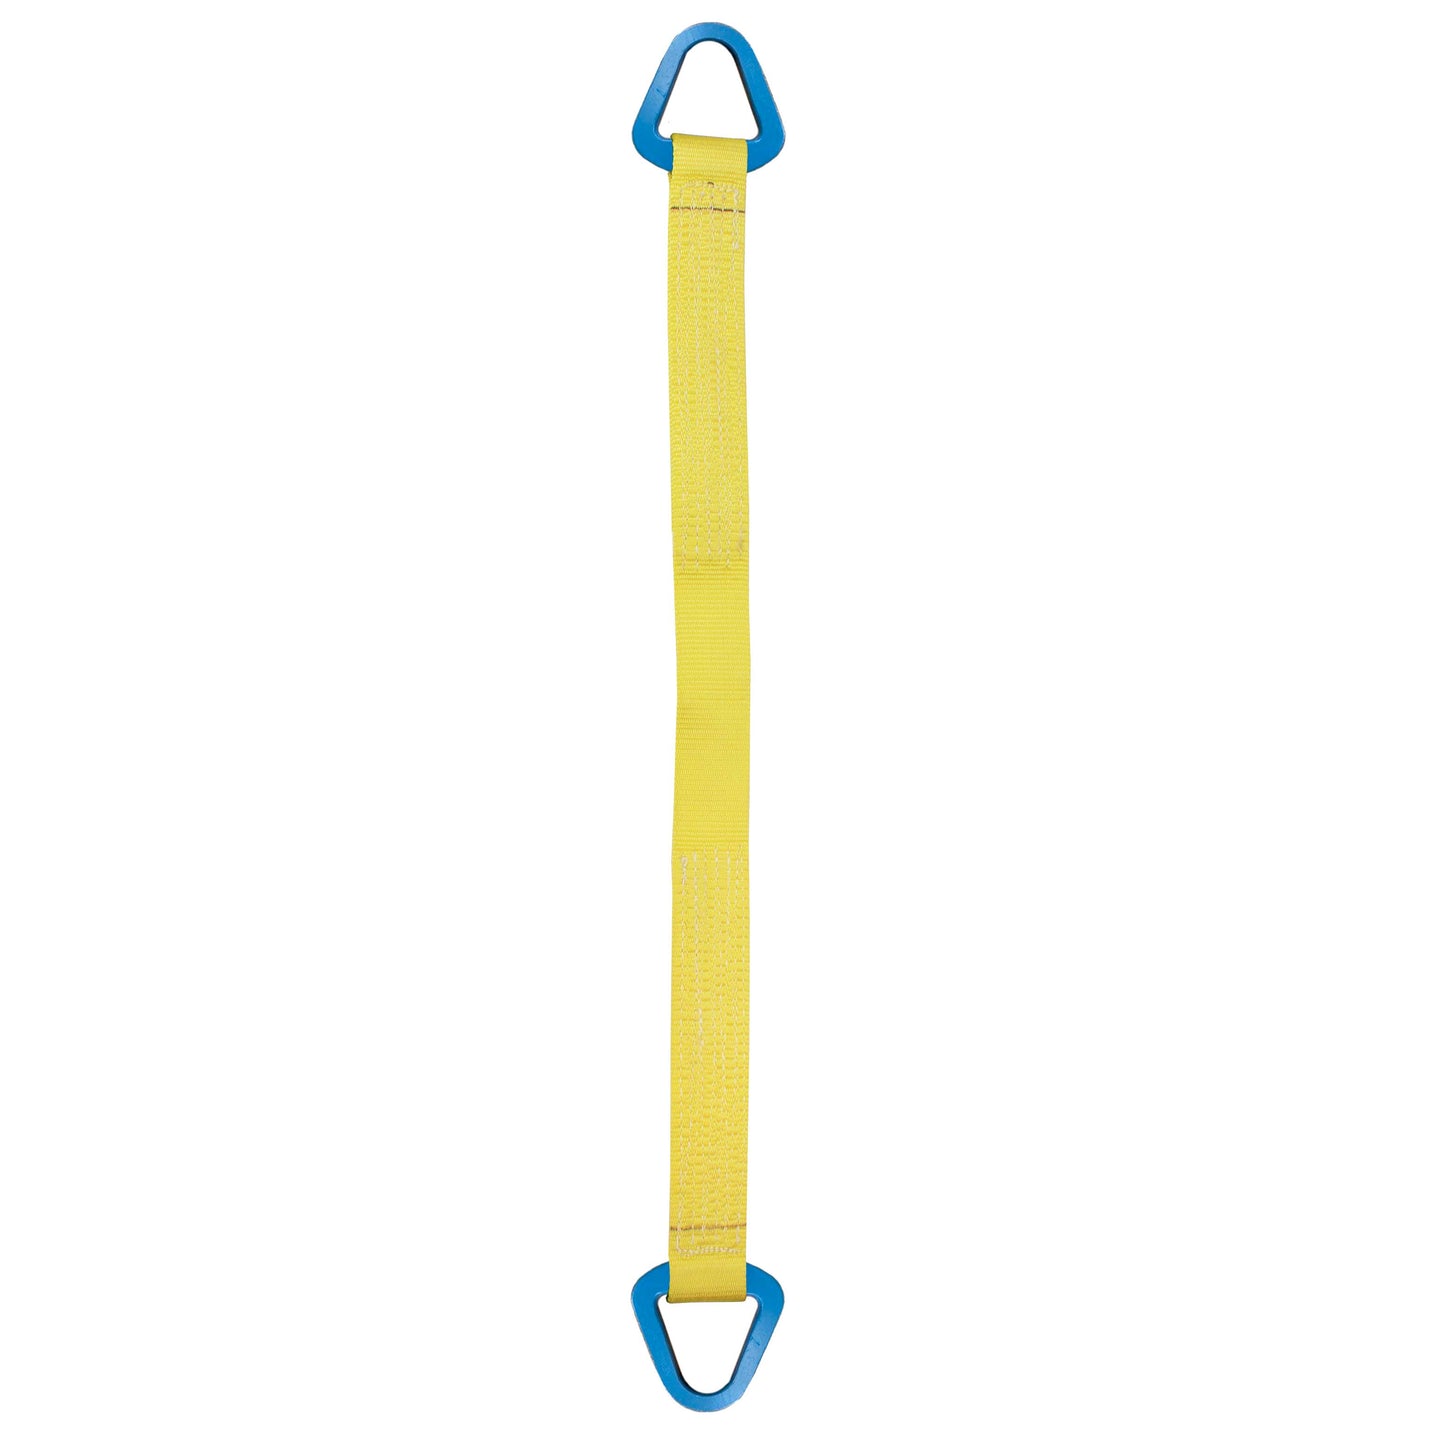 Nylon Lifting Sling Triangle 8 inch x 10 foot 1ply image 1 of 2